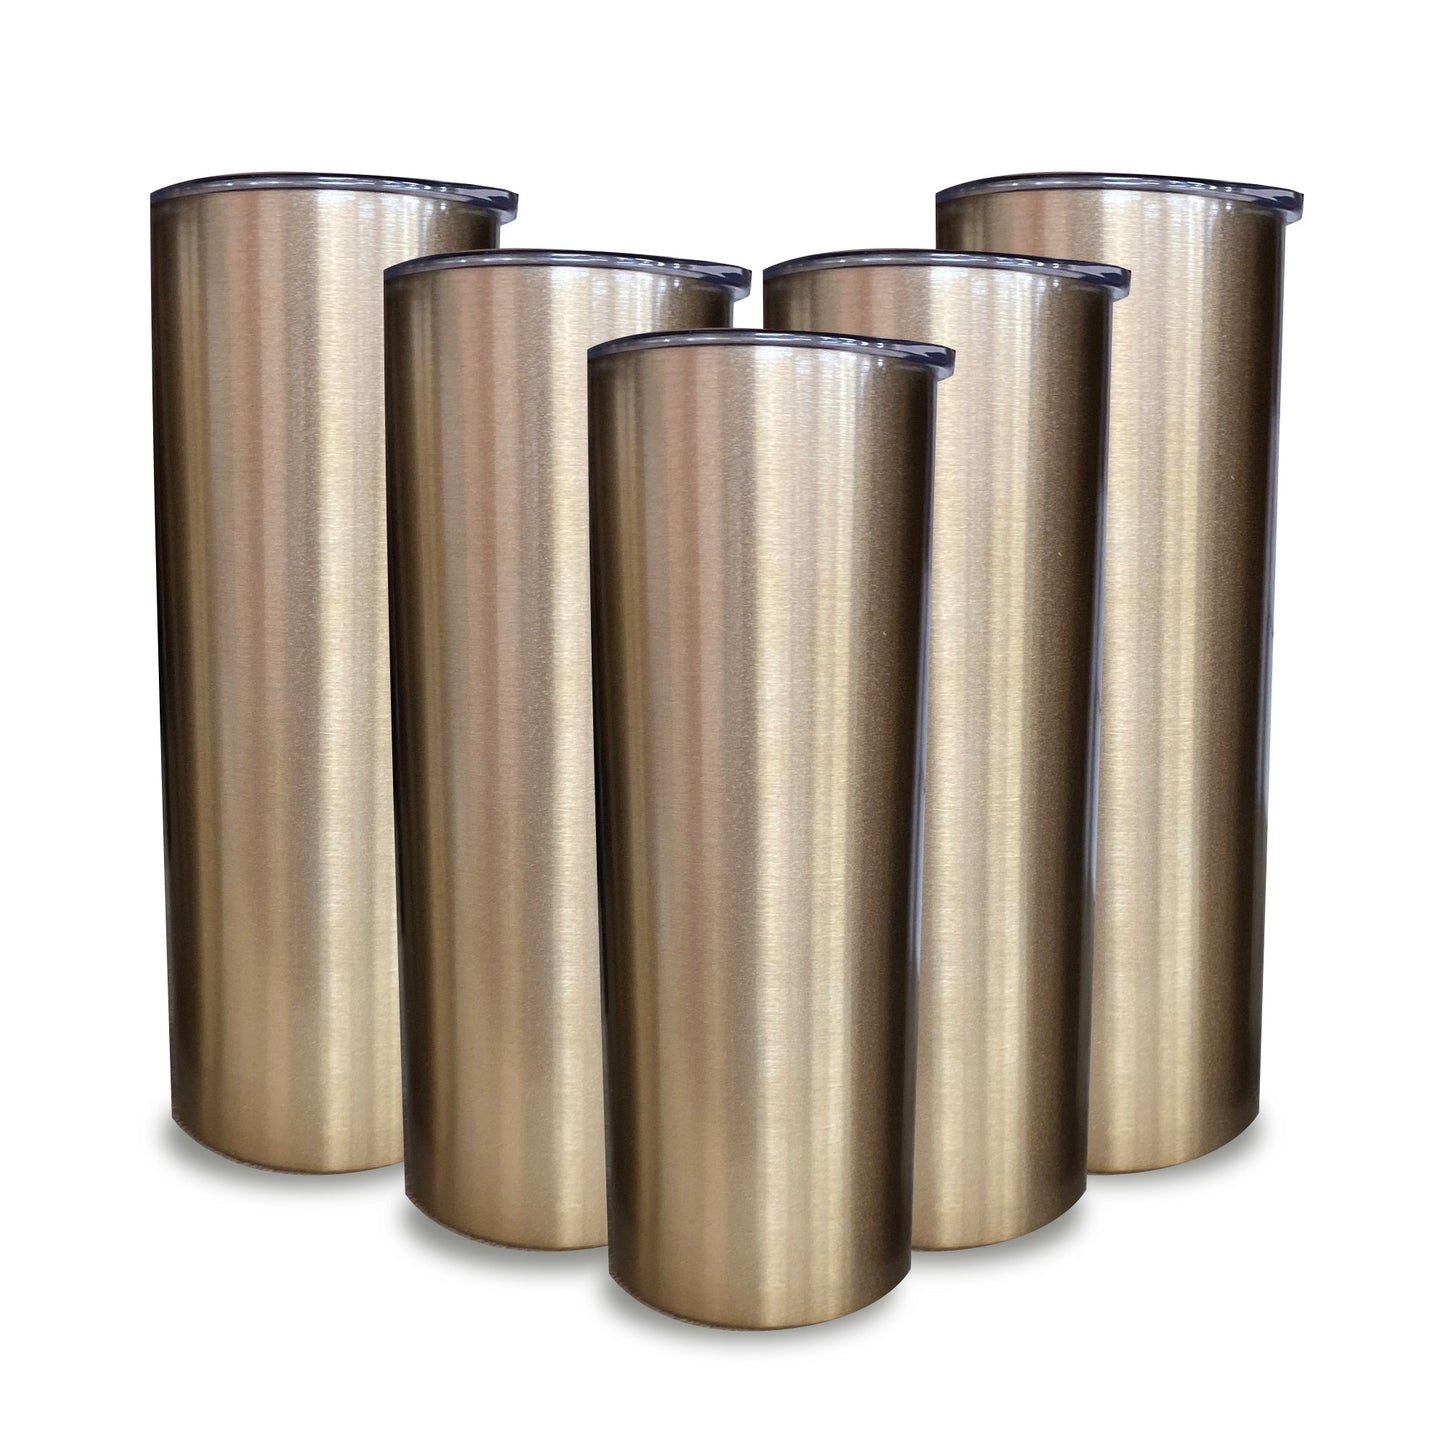 Gold Skinny Tumblers Bulk Wholesale 20 oz Stainless Steel Double Wall Cup Mug